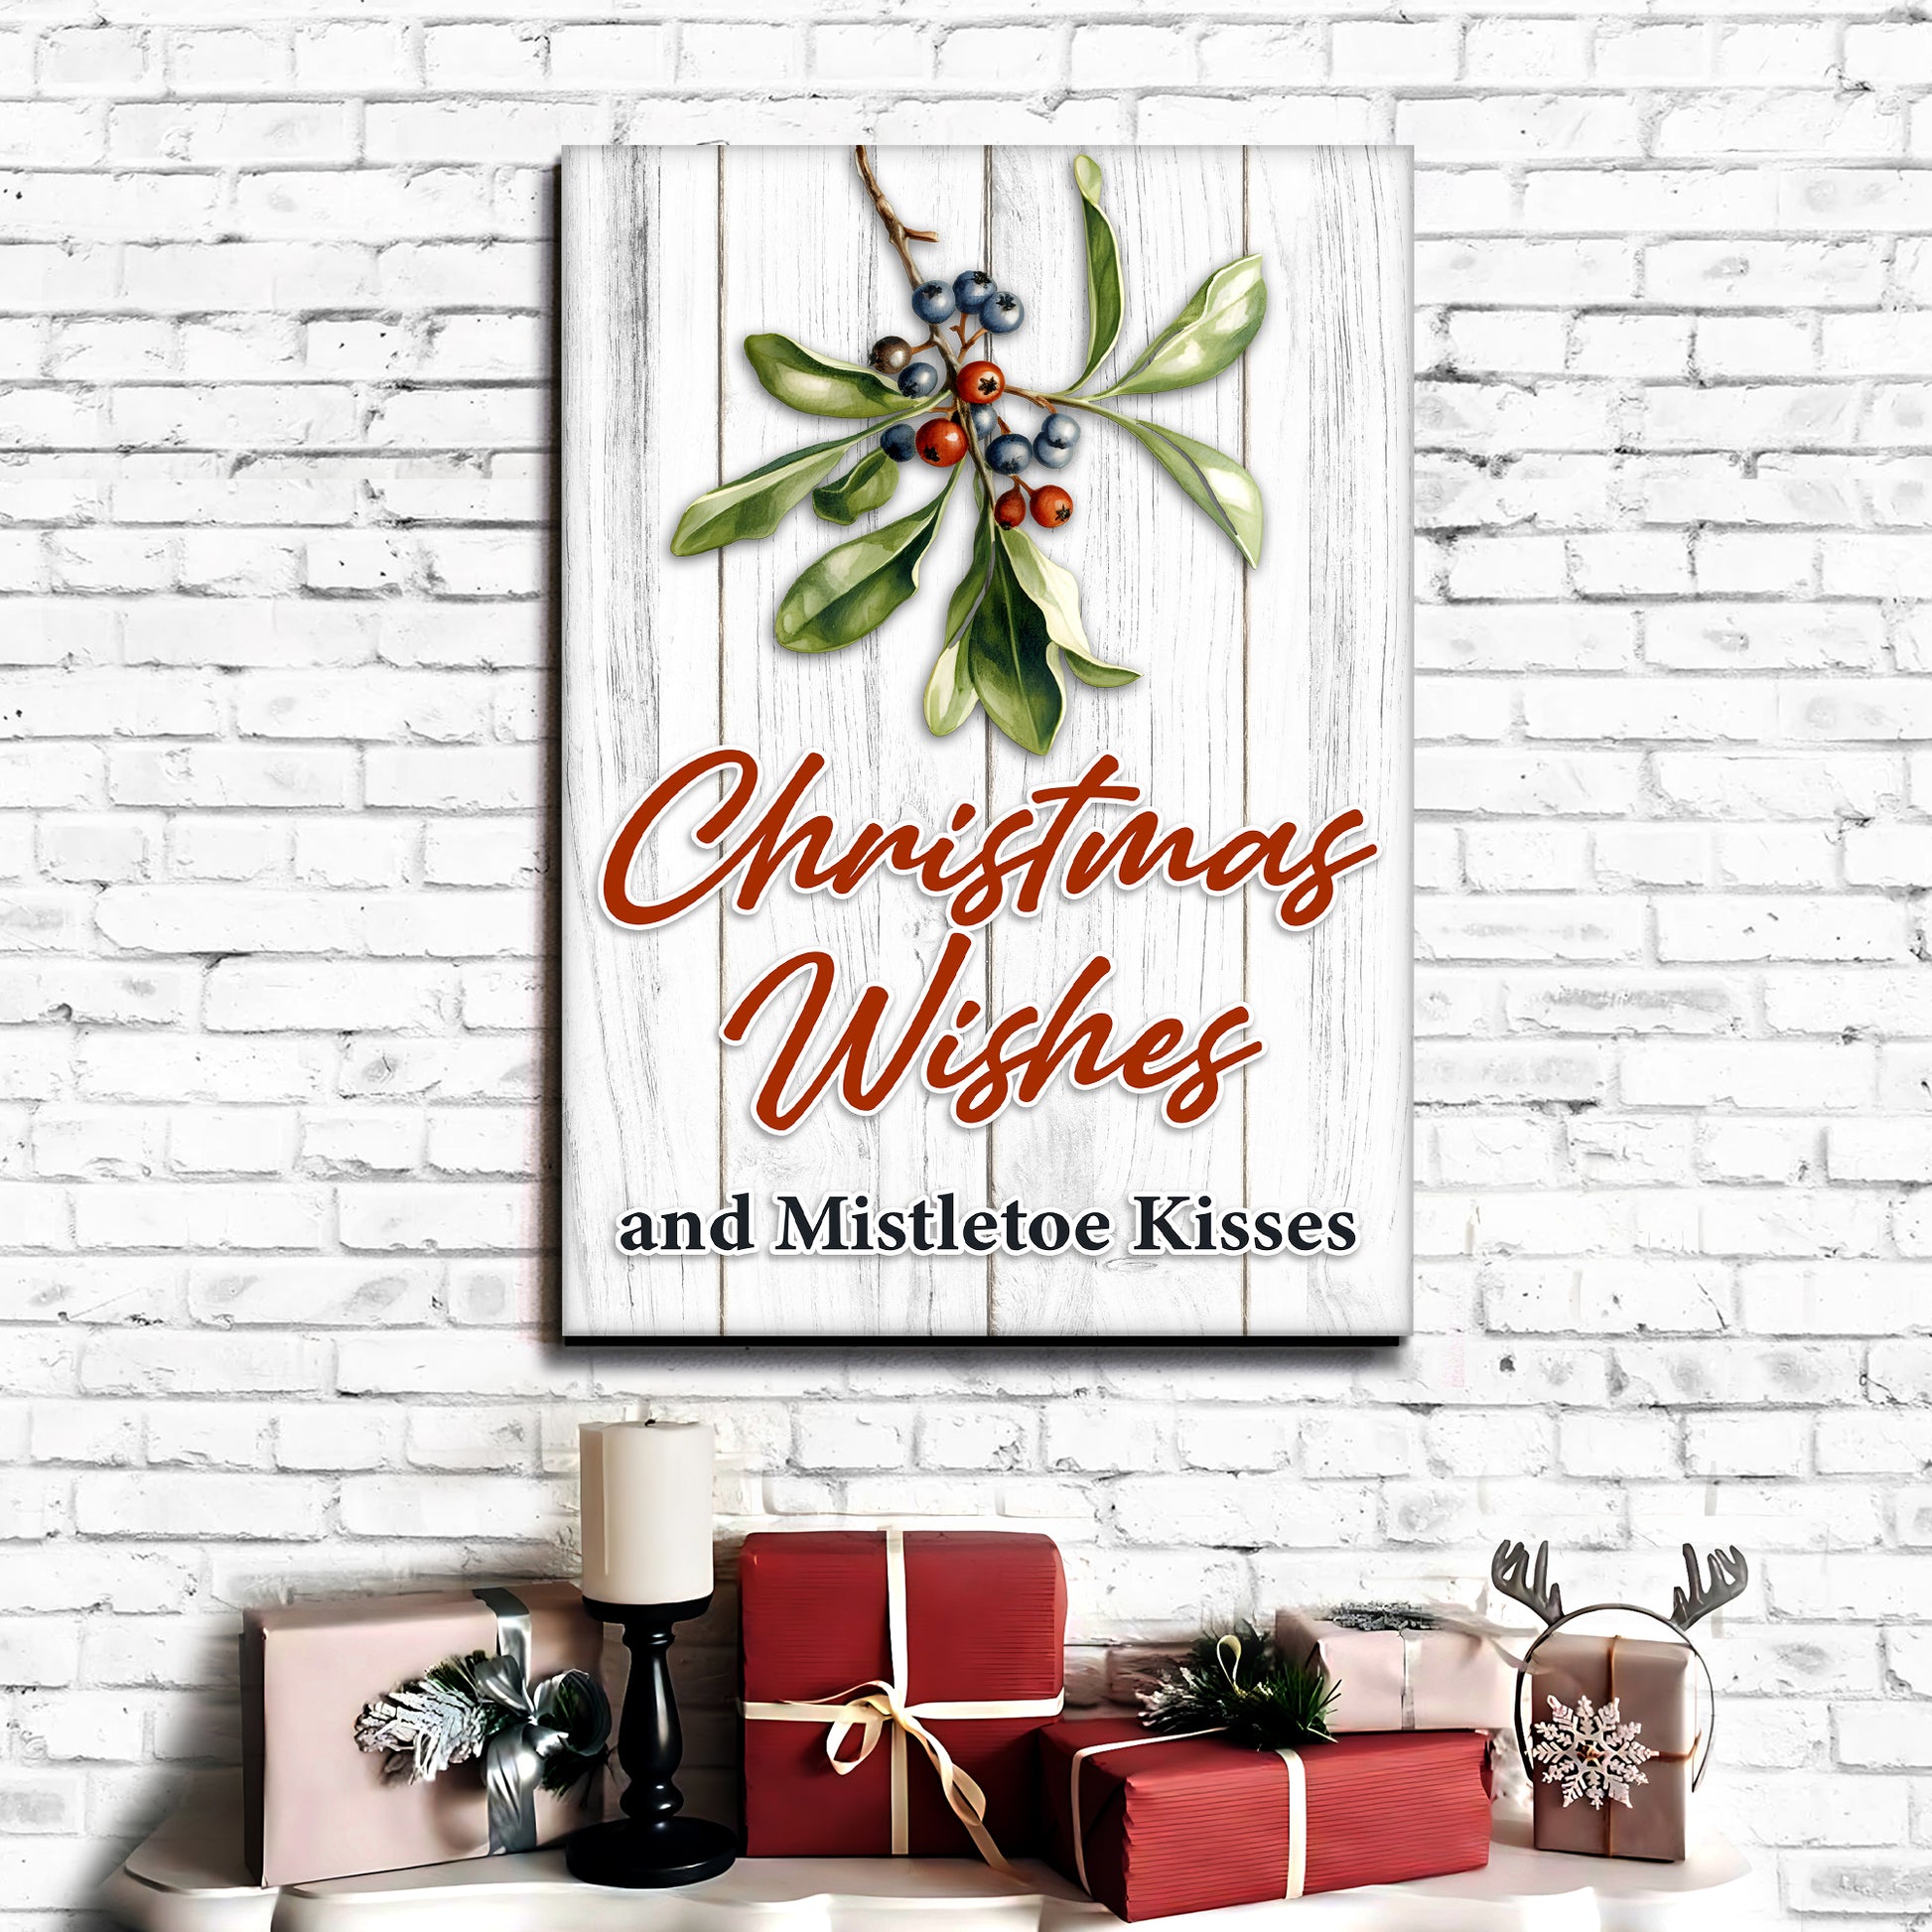 Christmas Wishes And Kisses Mistletoe Sign Style 2 - Image by Tailored Canvases